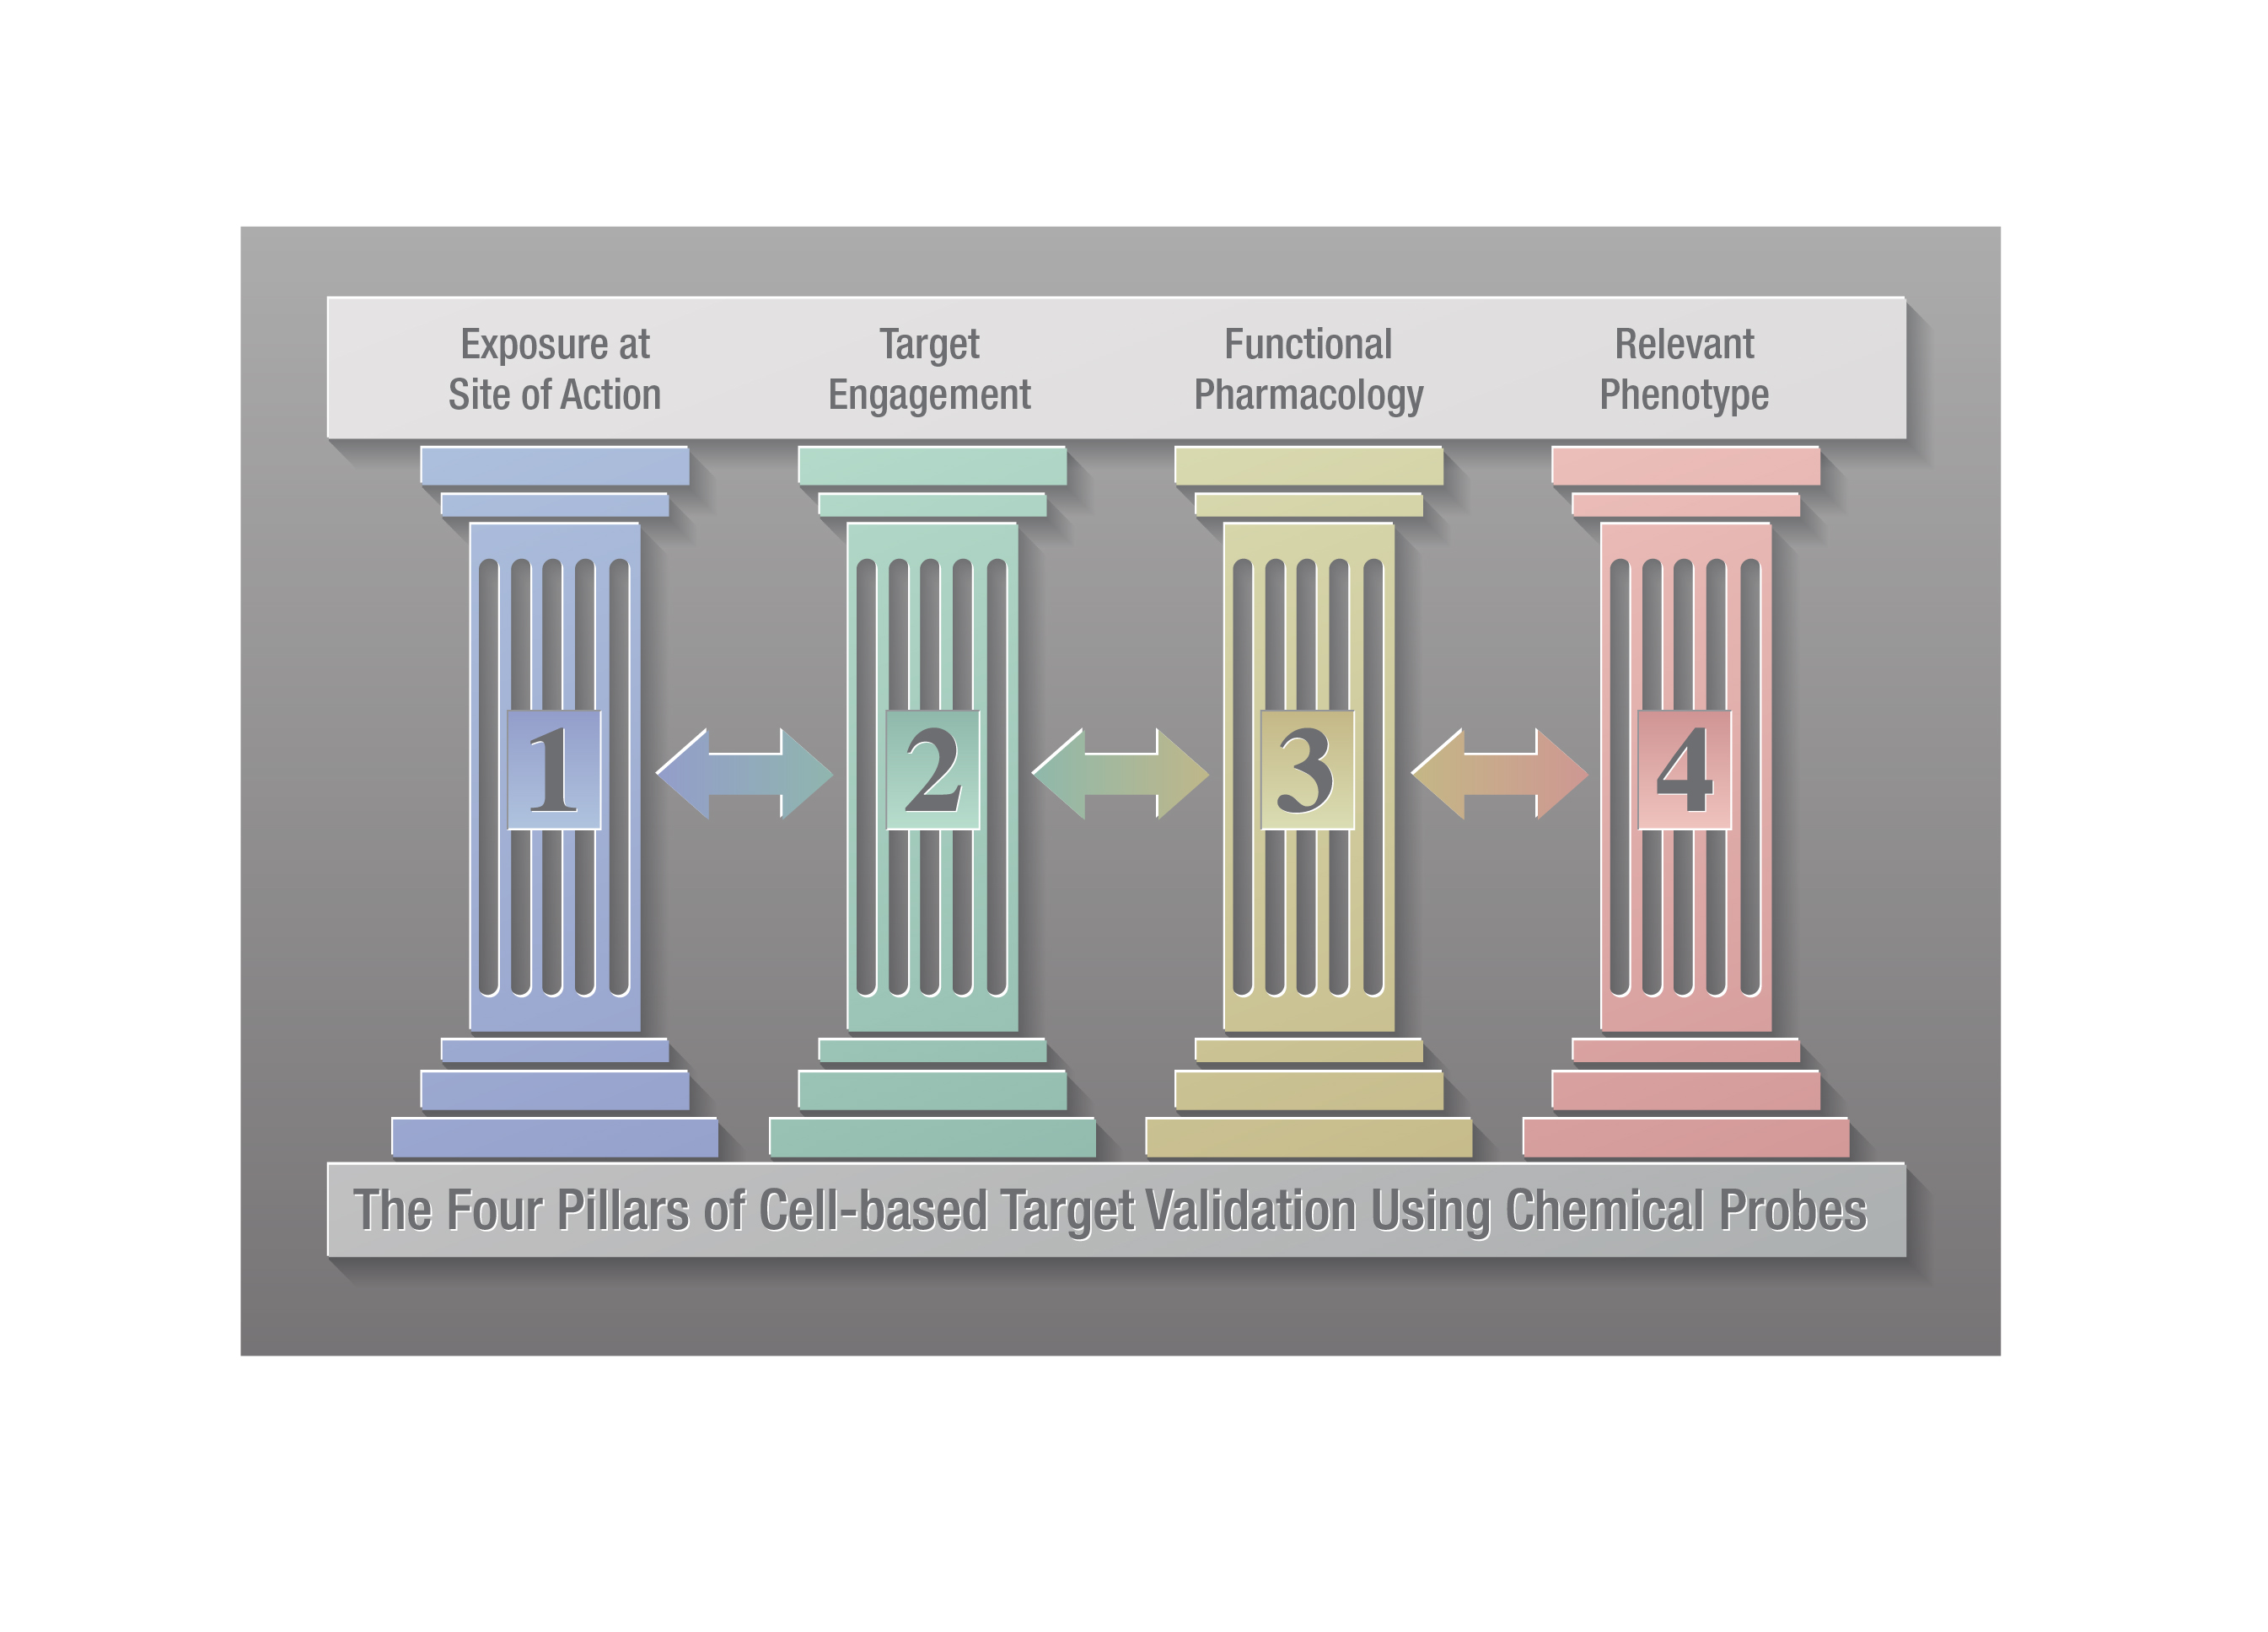 The four pillars of cell-based target validation using chemical probes